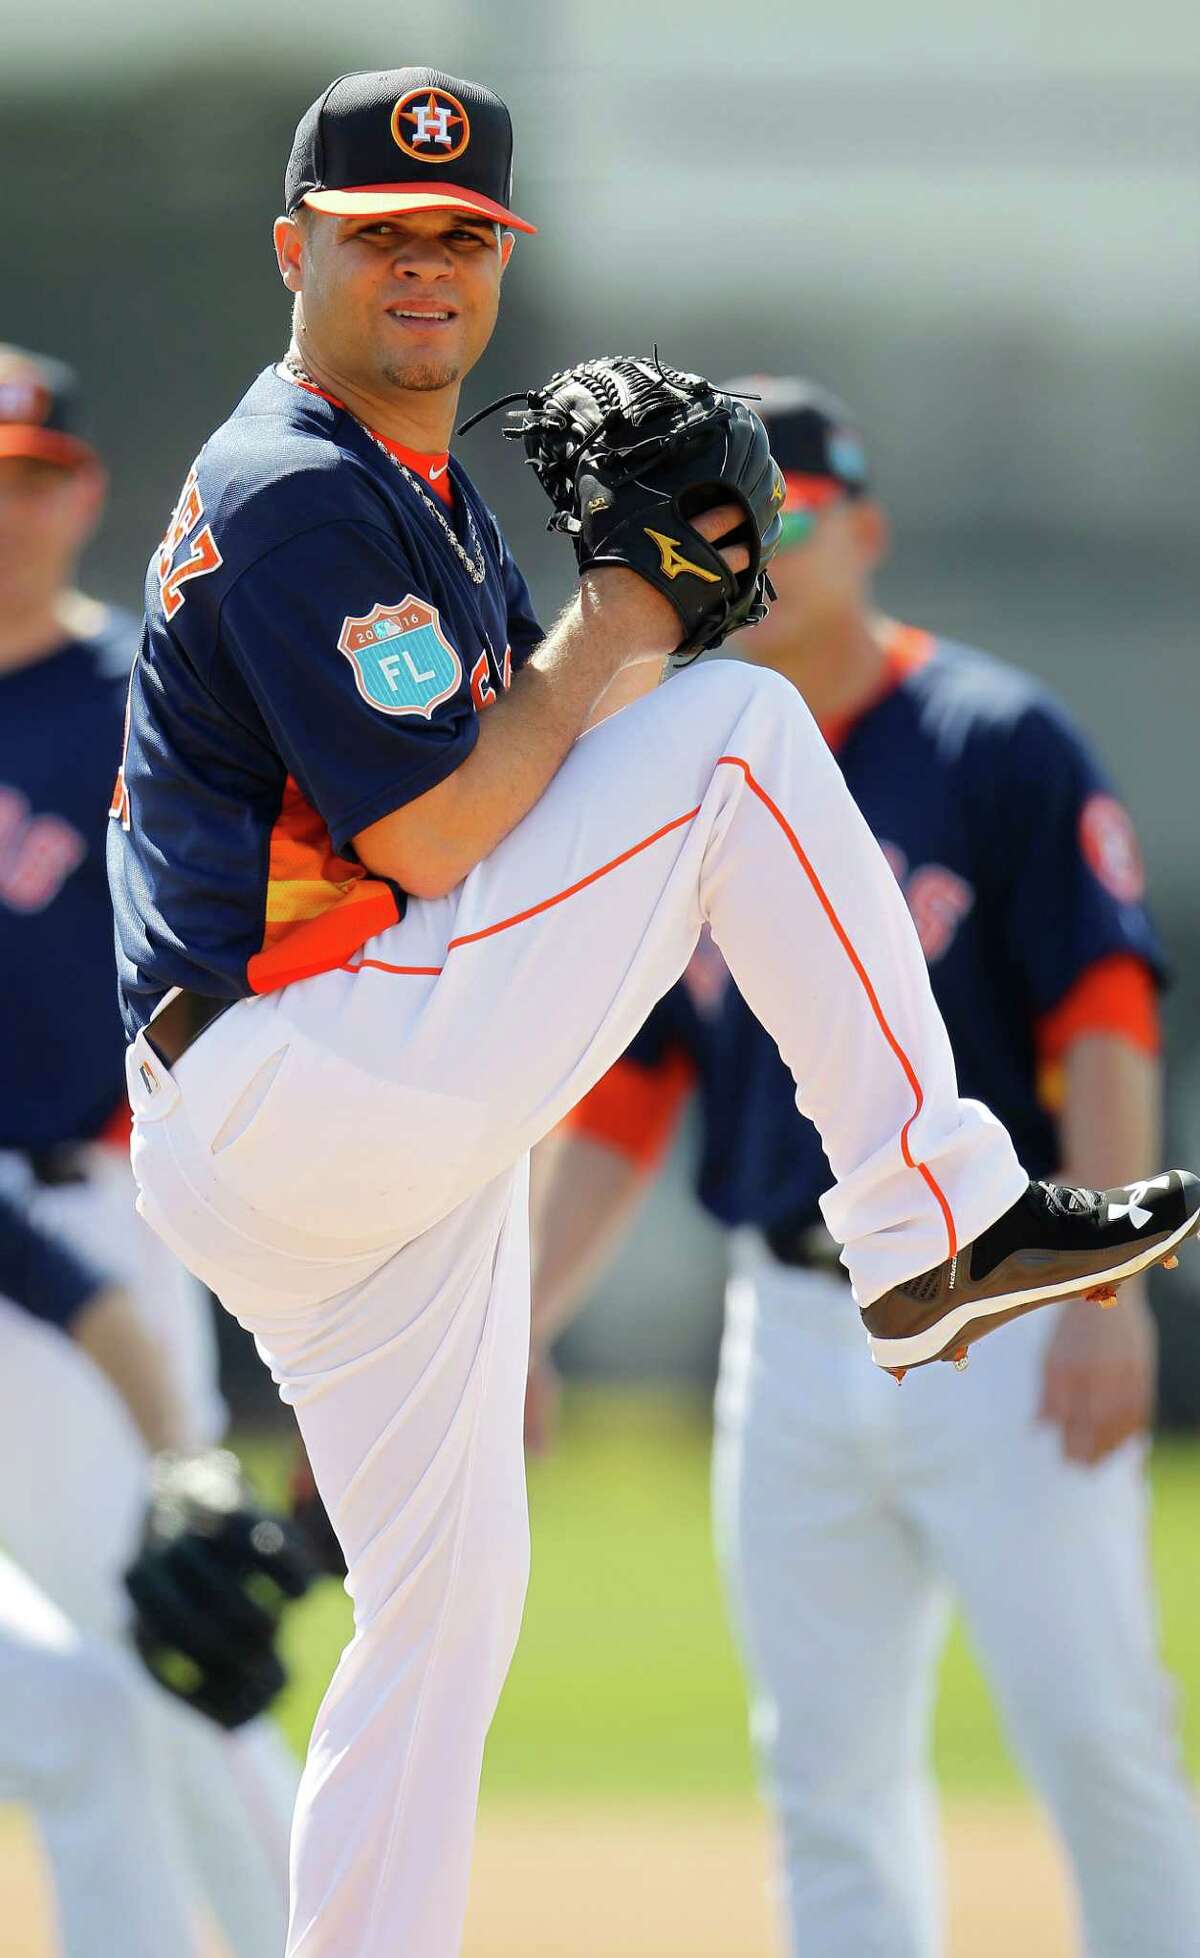 The Astros know they will get lefthander Wandy Rodriguez's best effort as he tries to make the team in spring training. He was with the Astros from 2005 until 2012.